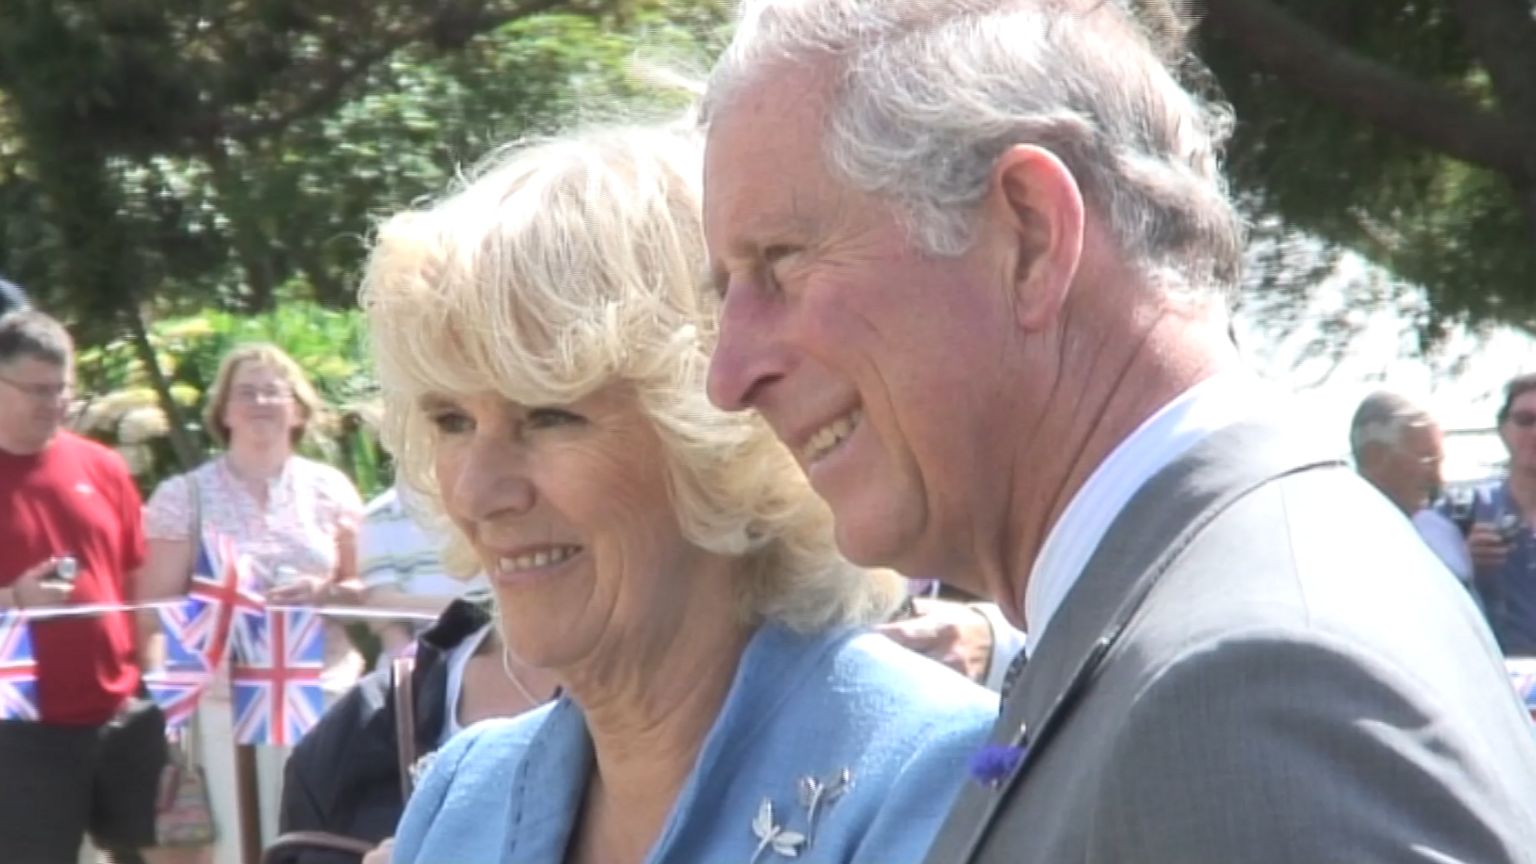 King Charles III and Queen Camilla will visit Guernsey on 16 July